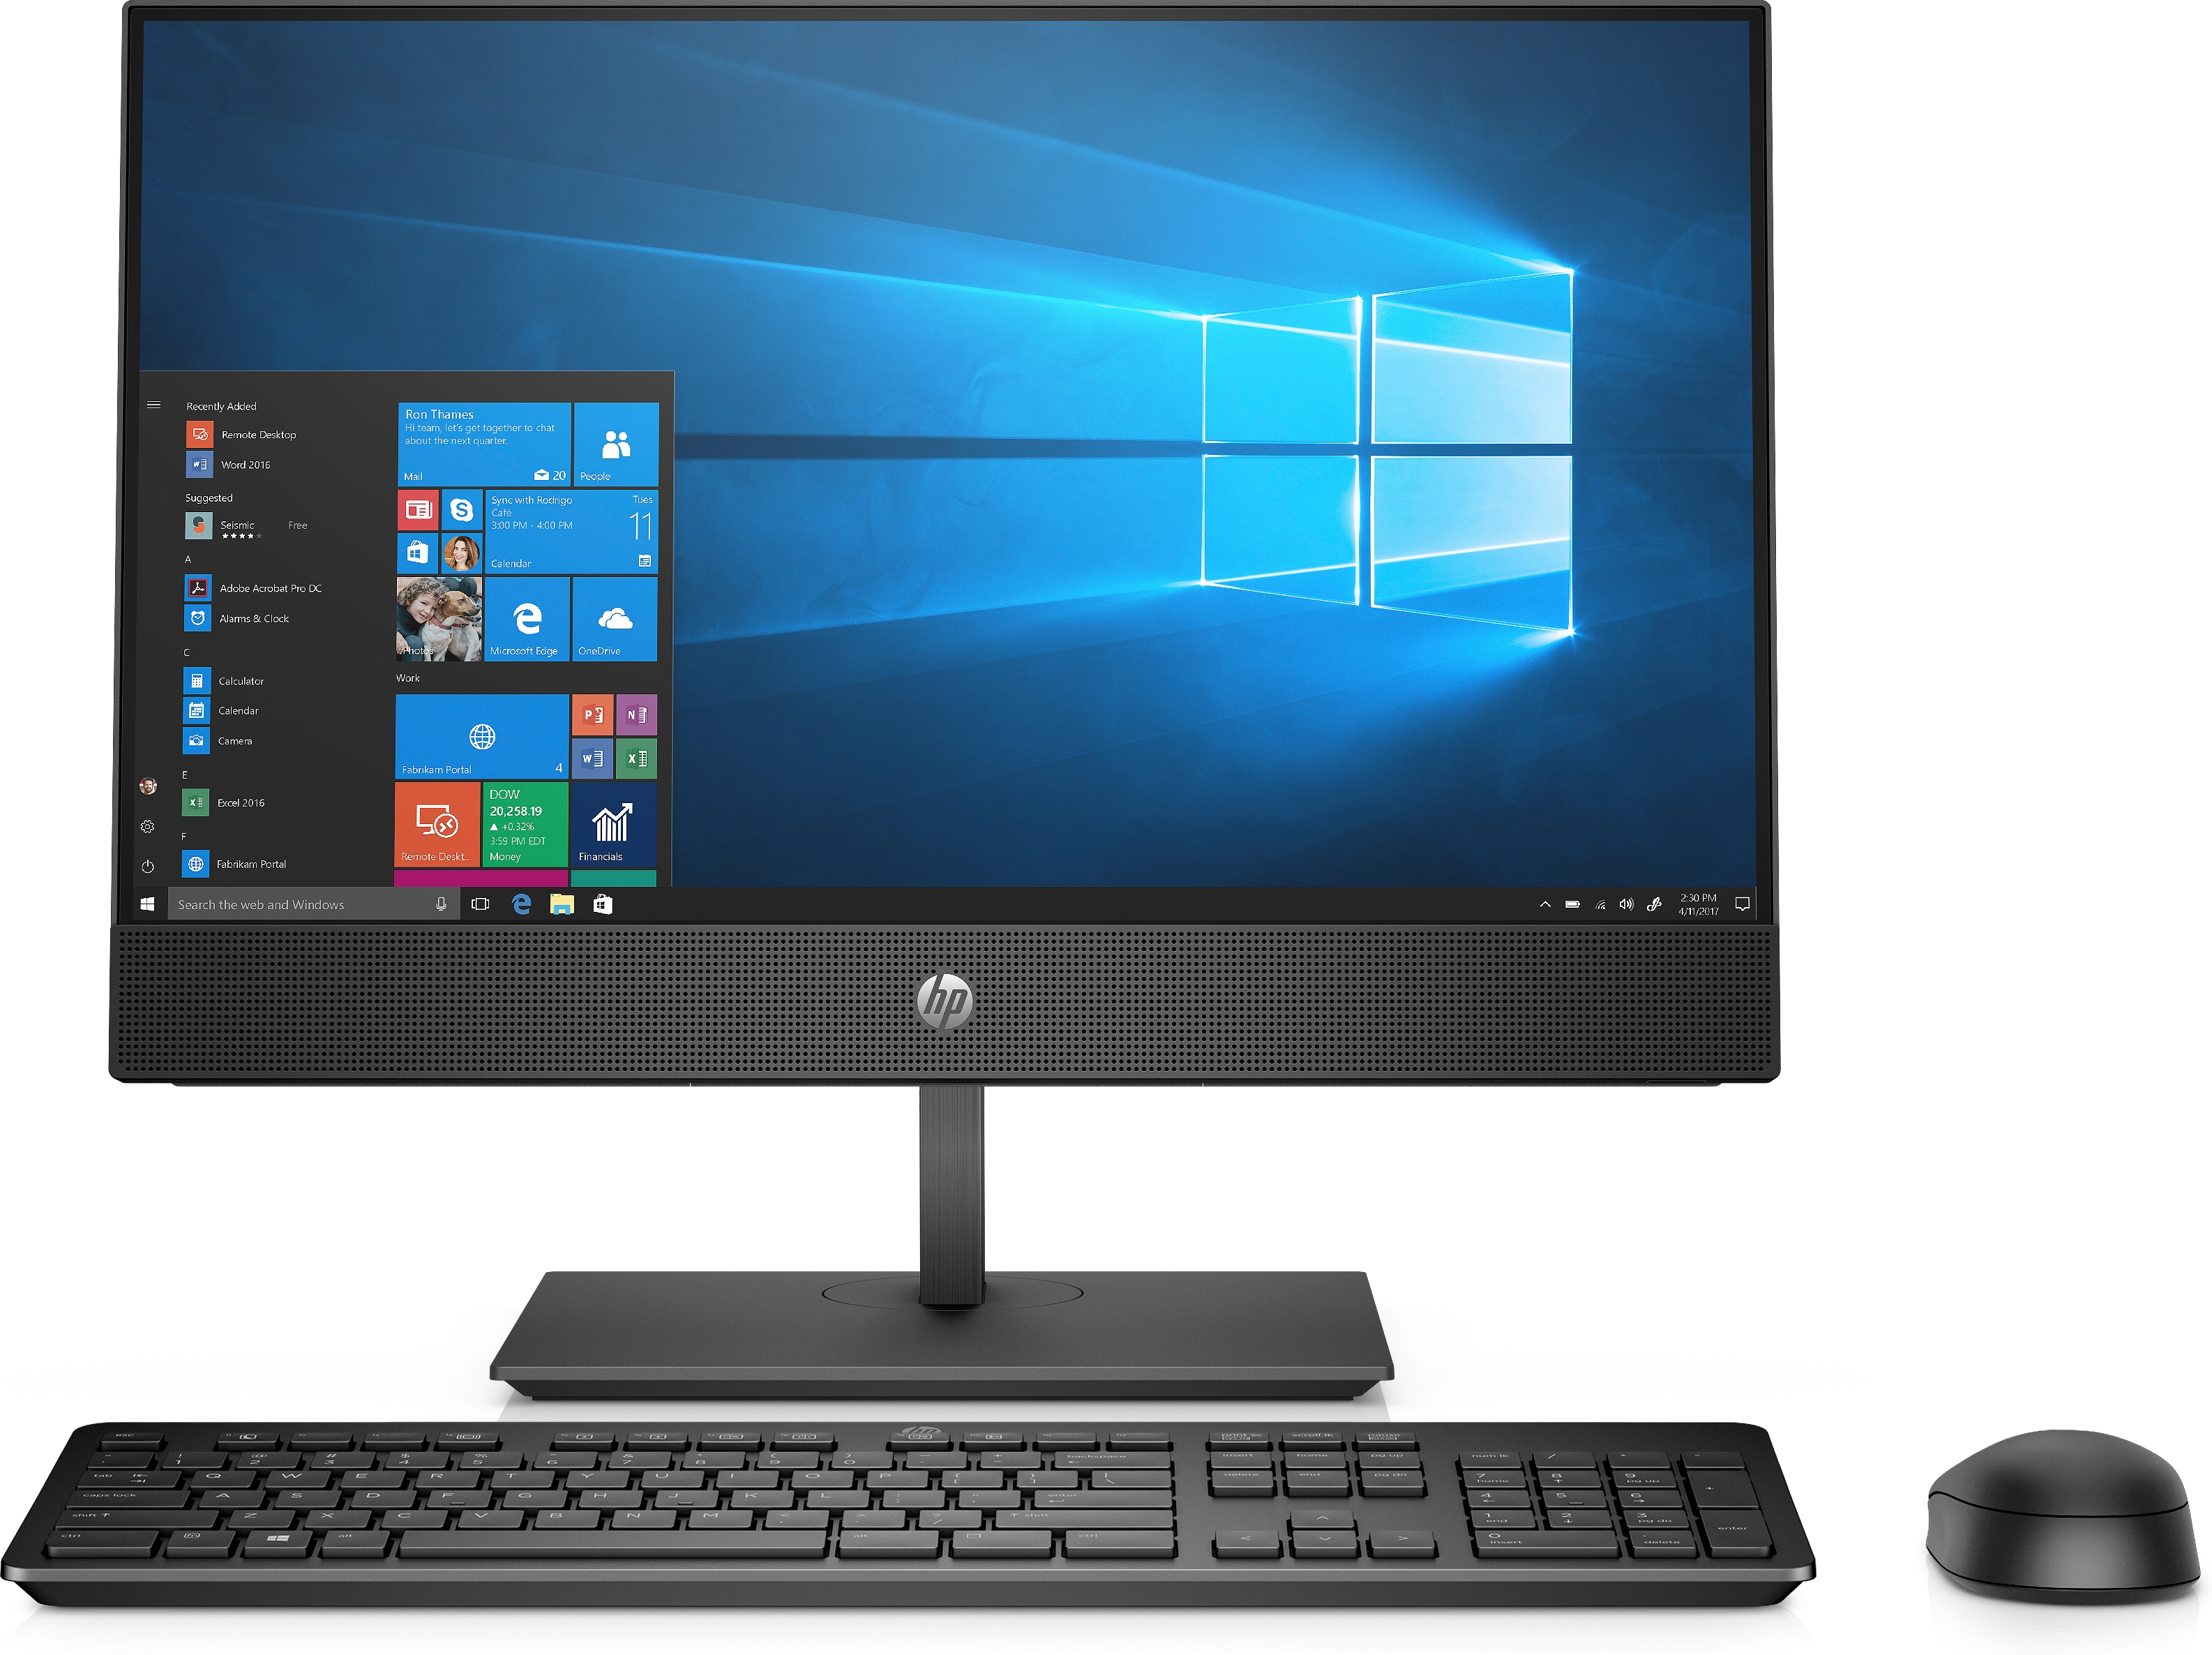 HP ProOne 600 G4 + Microsoft Office Home & Business 2016 + Slim Wireless Keyboard & Mouse